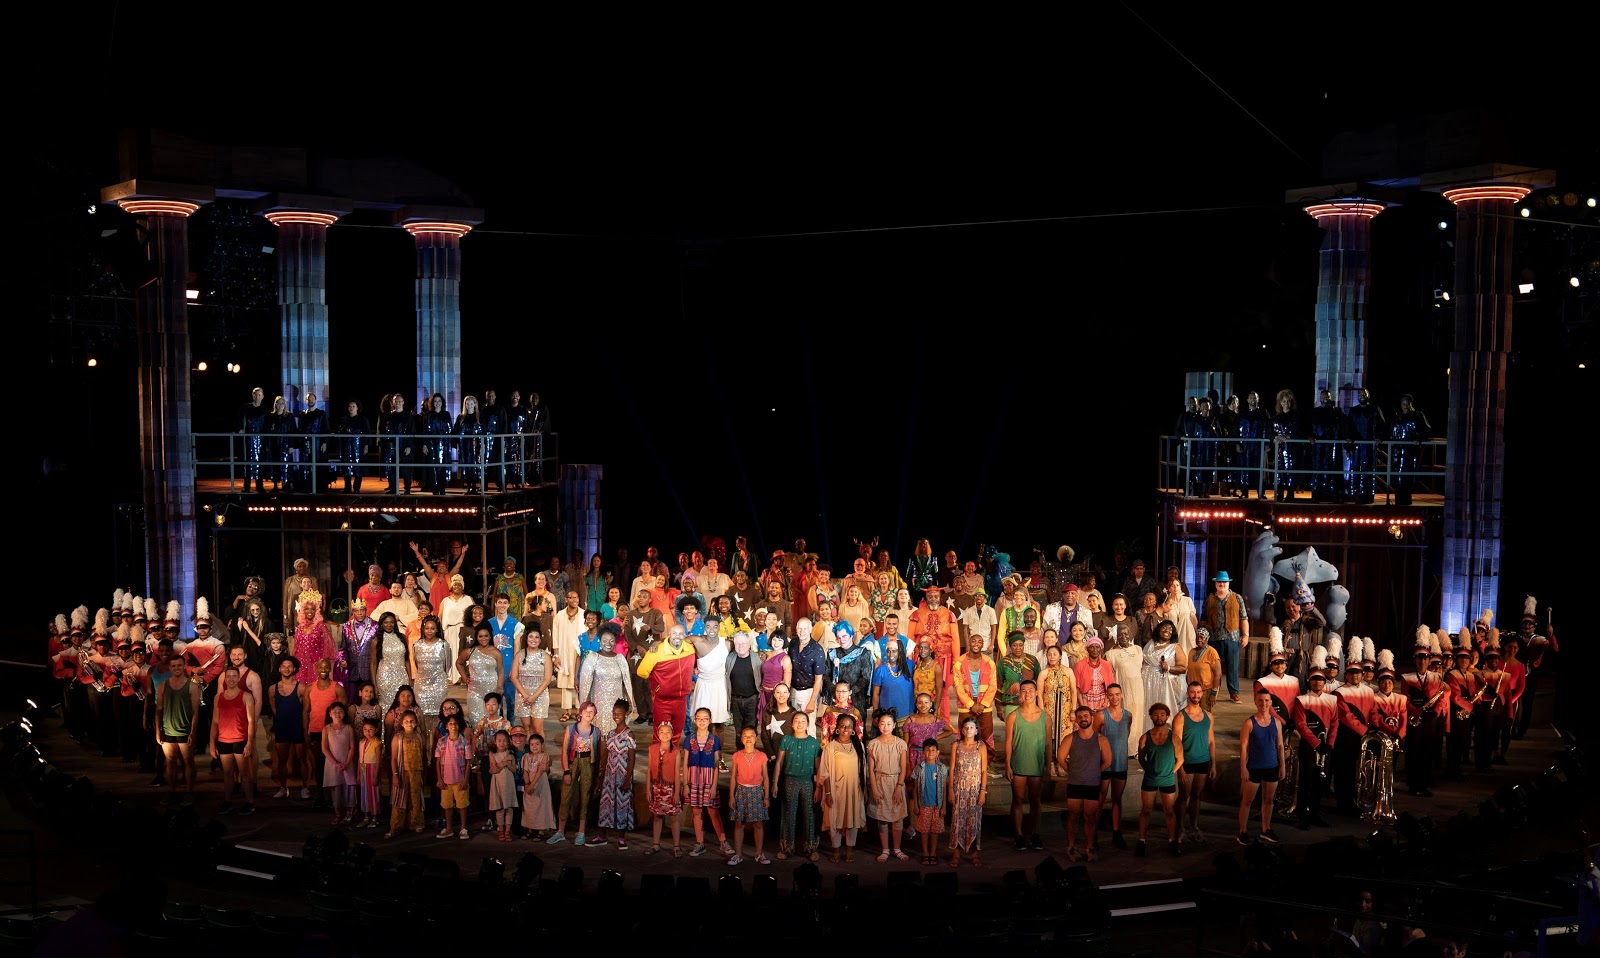 The company of The Public Theater’s free Public Works musical adaptation of Hercules, with music by Alan Menken, lyrics by David Zippel, book by Kristoffer Diaz, choreography by Chase Brock, and directed by Lear deBessonet, running at the Delacorte Theater. Photo credit: Joan Marcus.